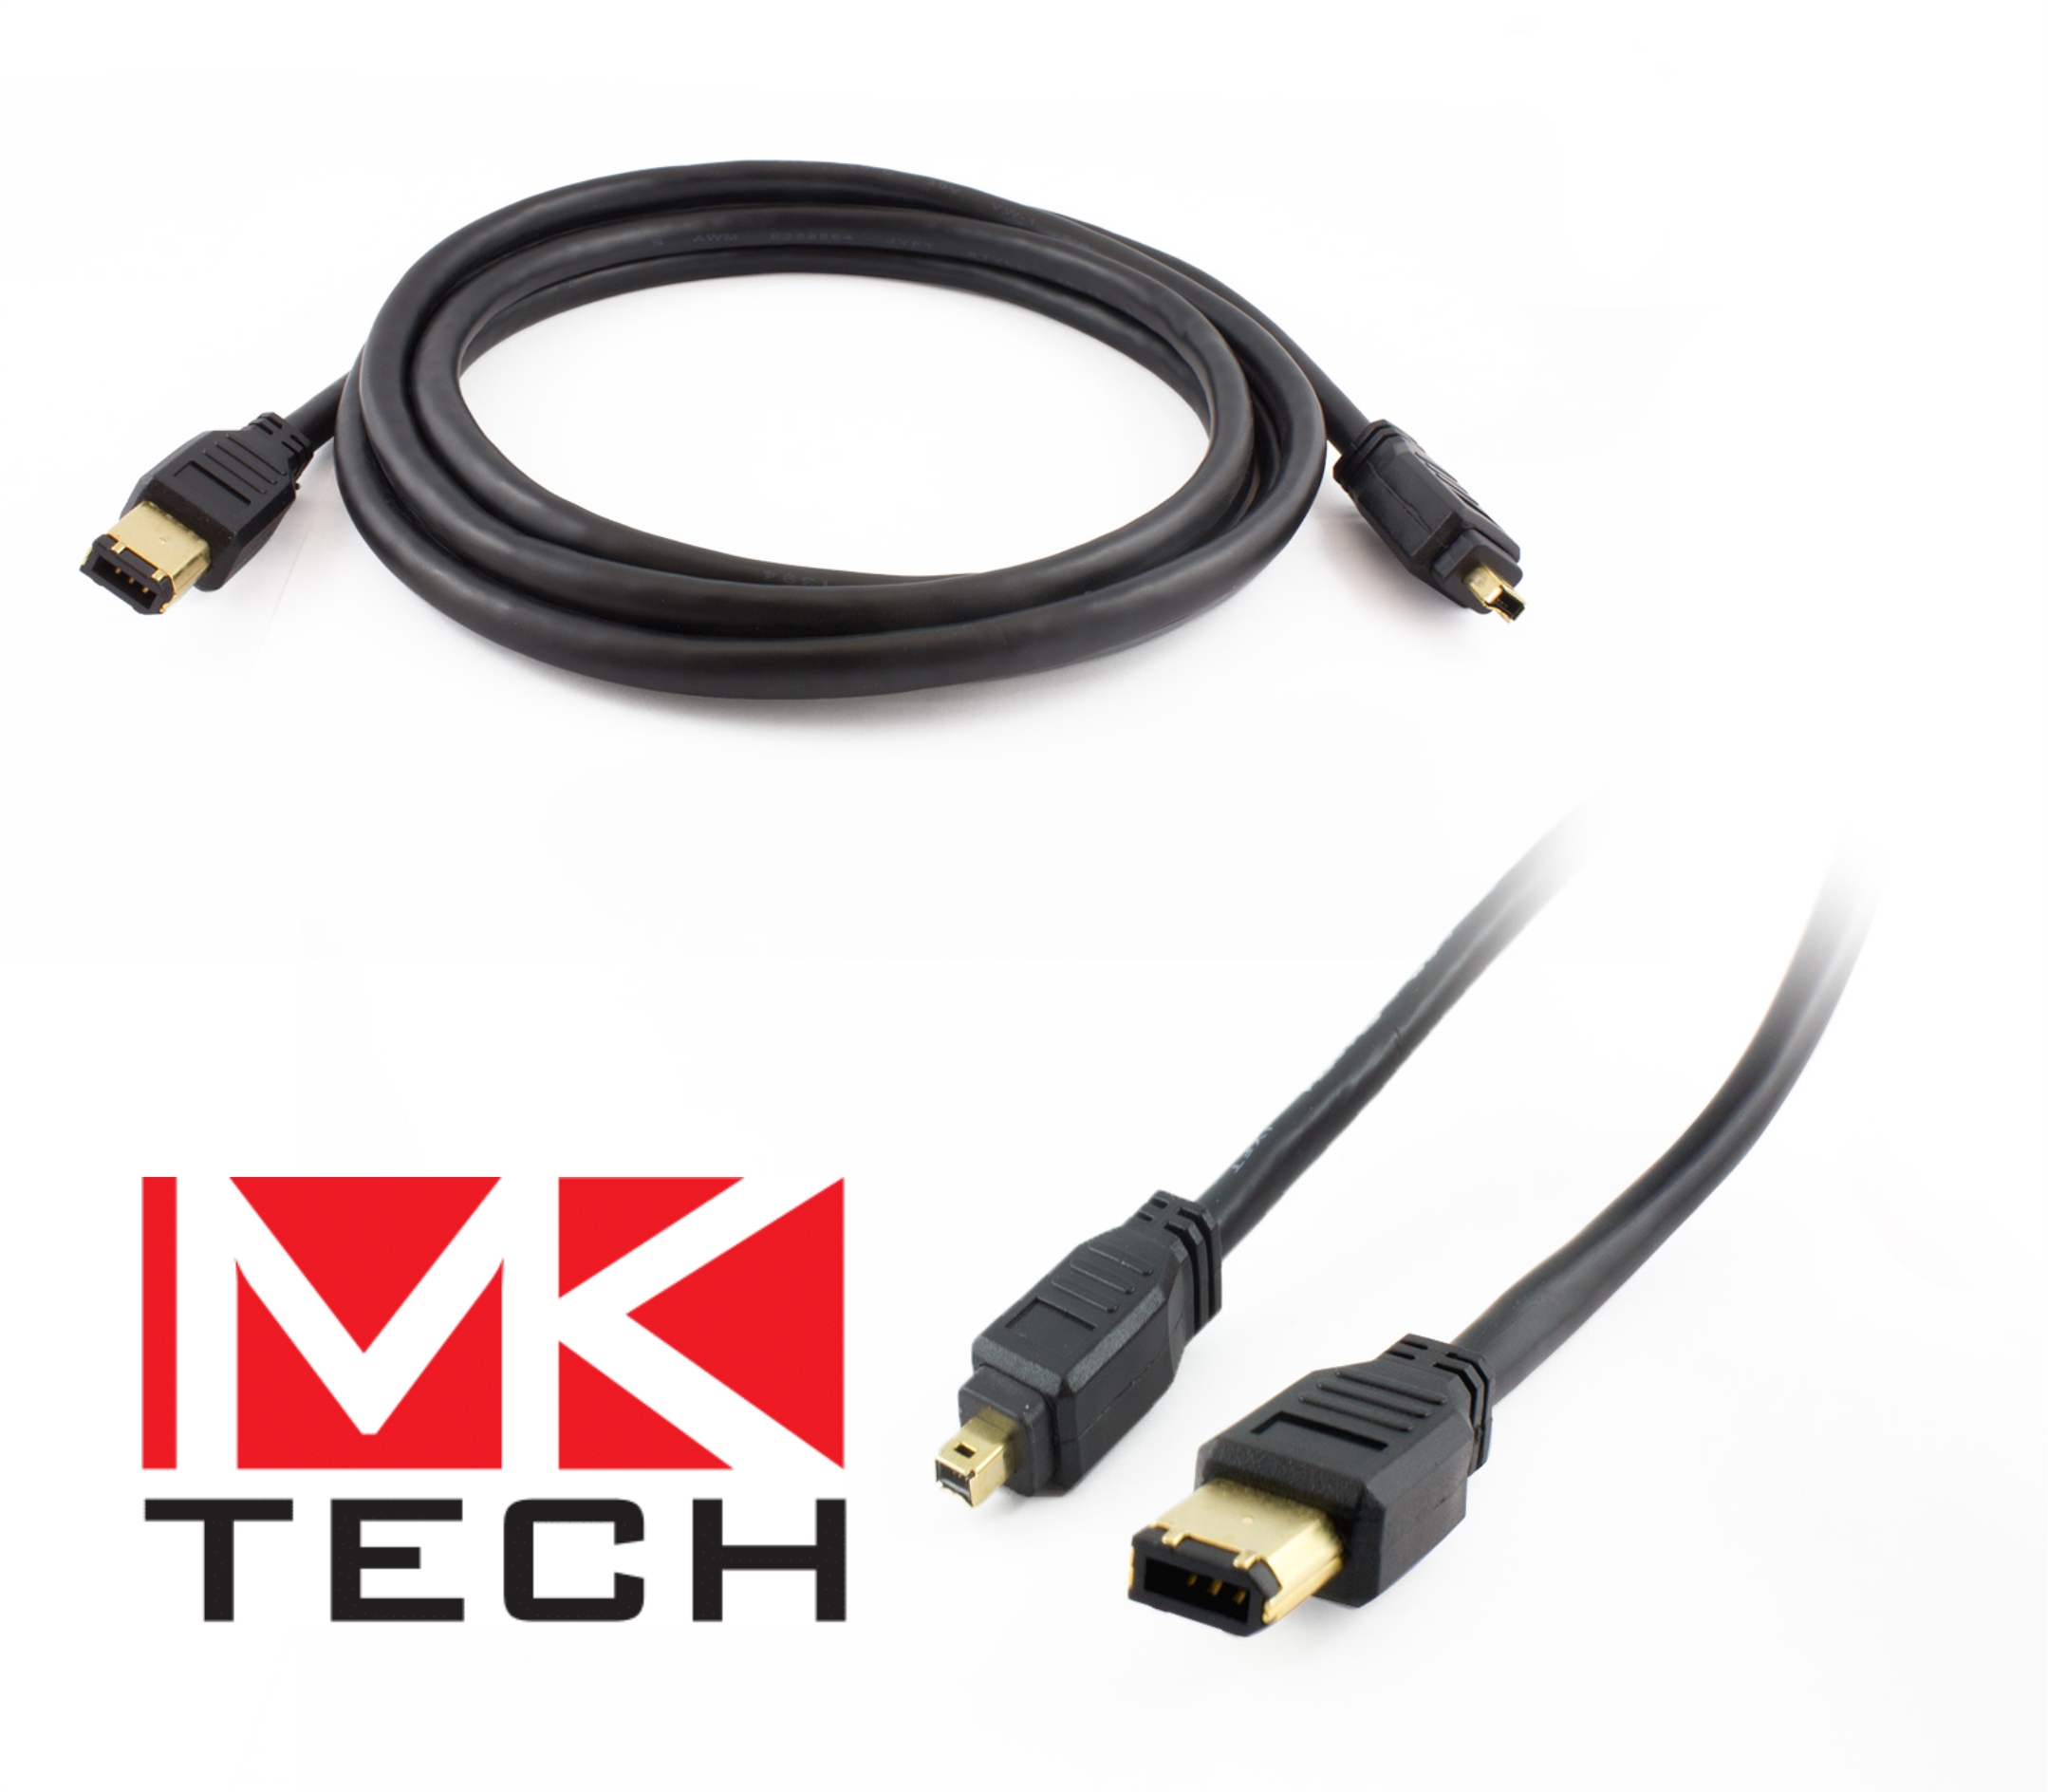 MKTECH IEEE-1394 cable, type 4/6, 1.8m